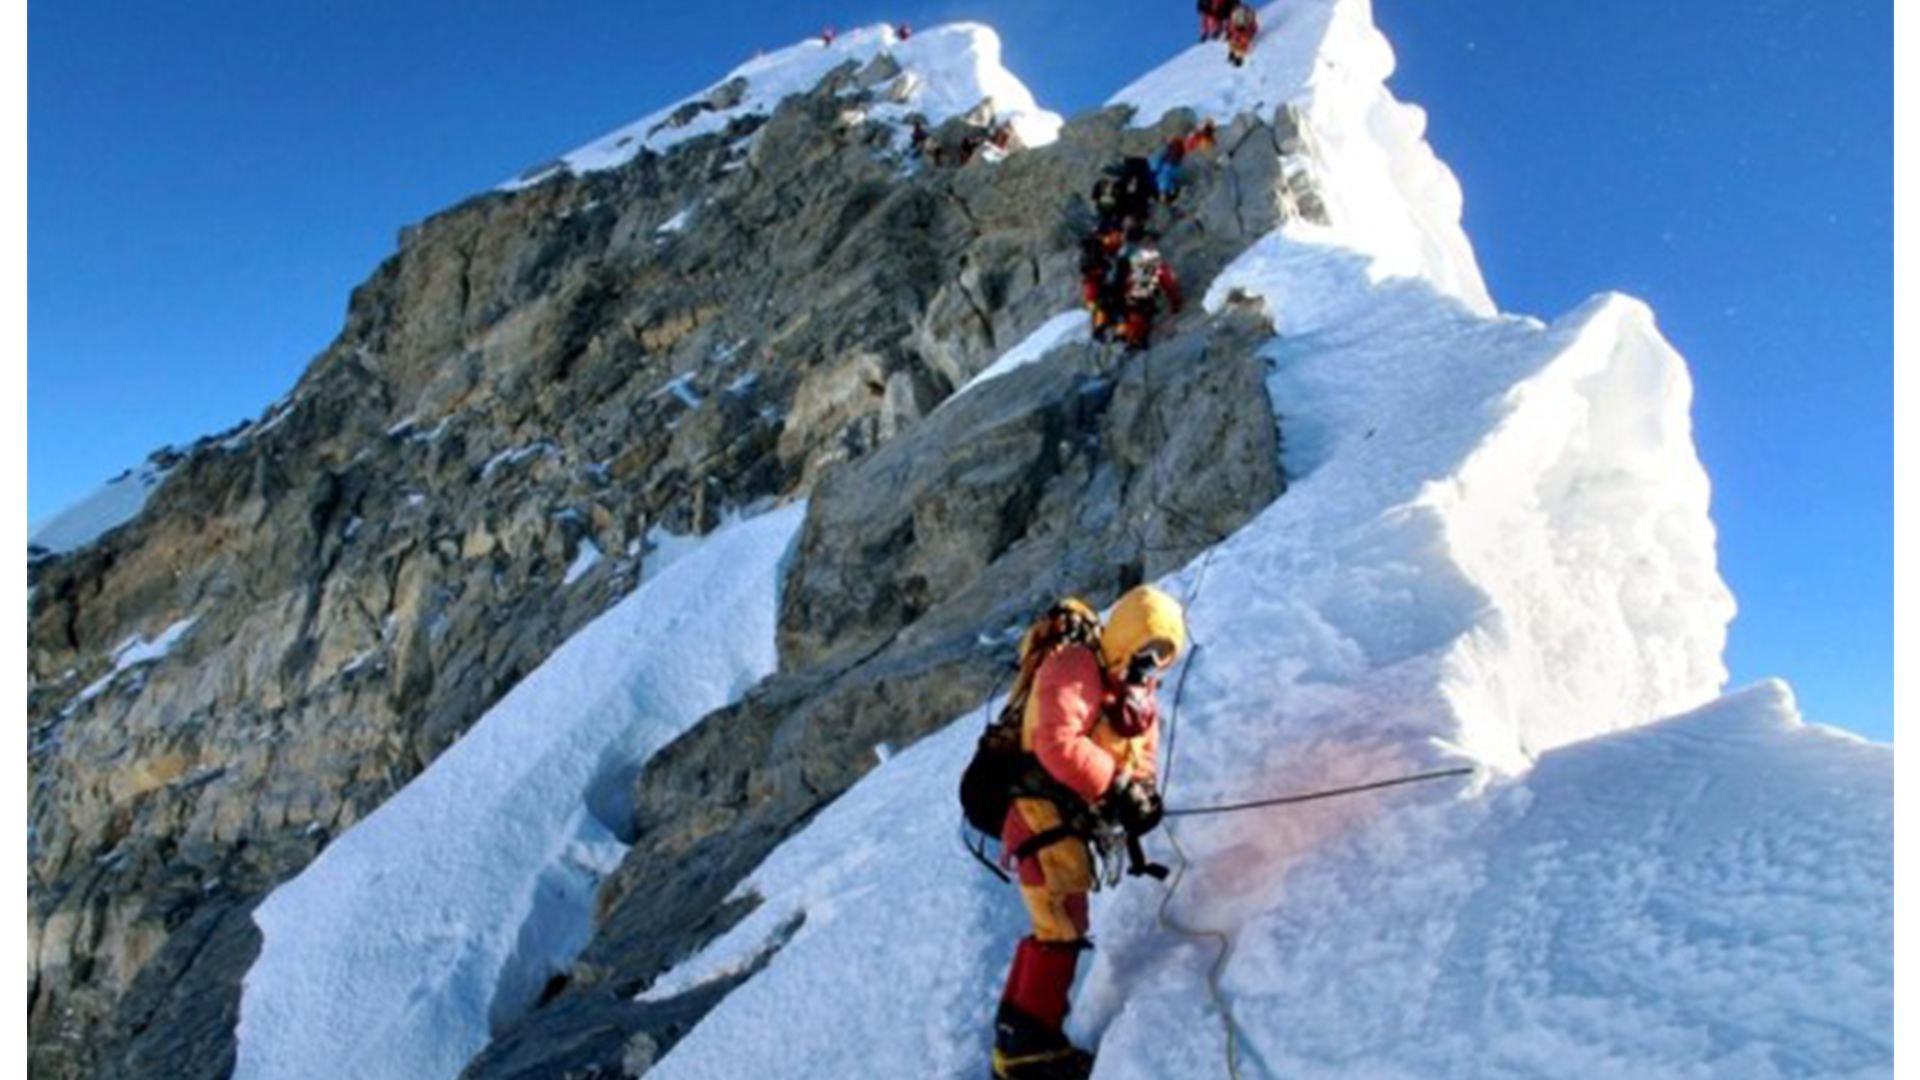 Nepal reports increase in Everest height, joint announcement with China soon